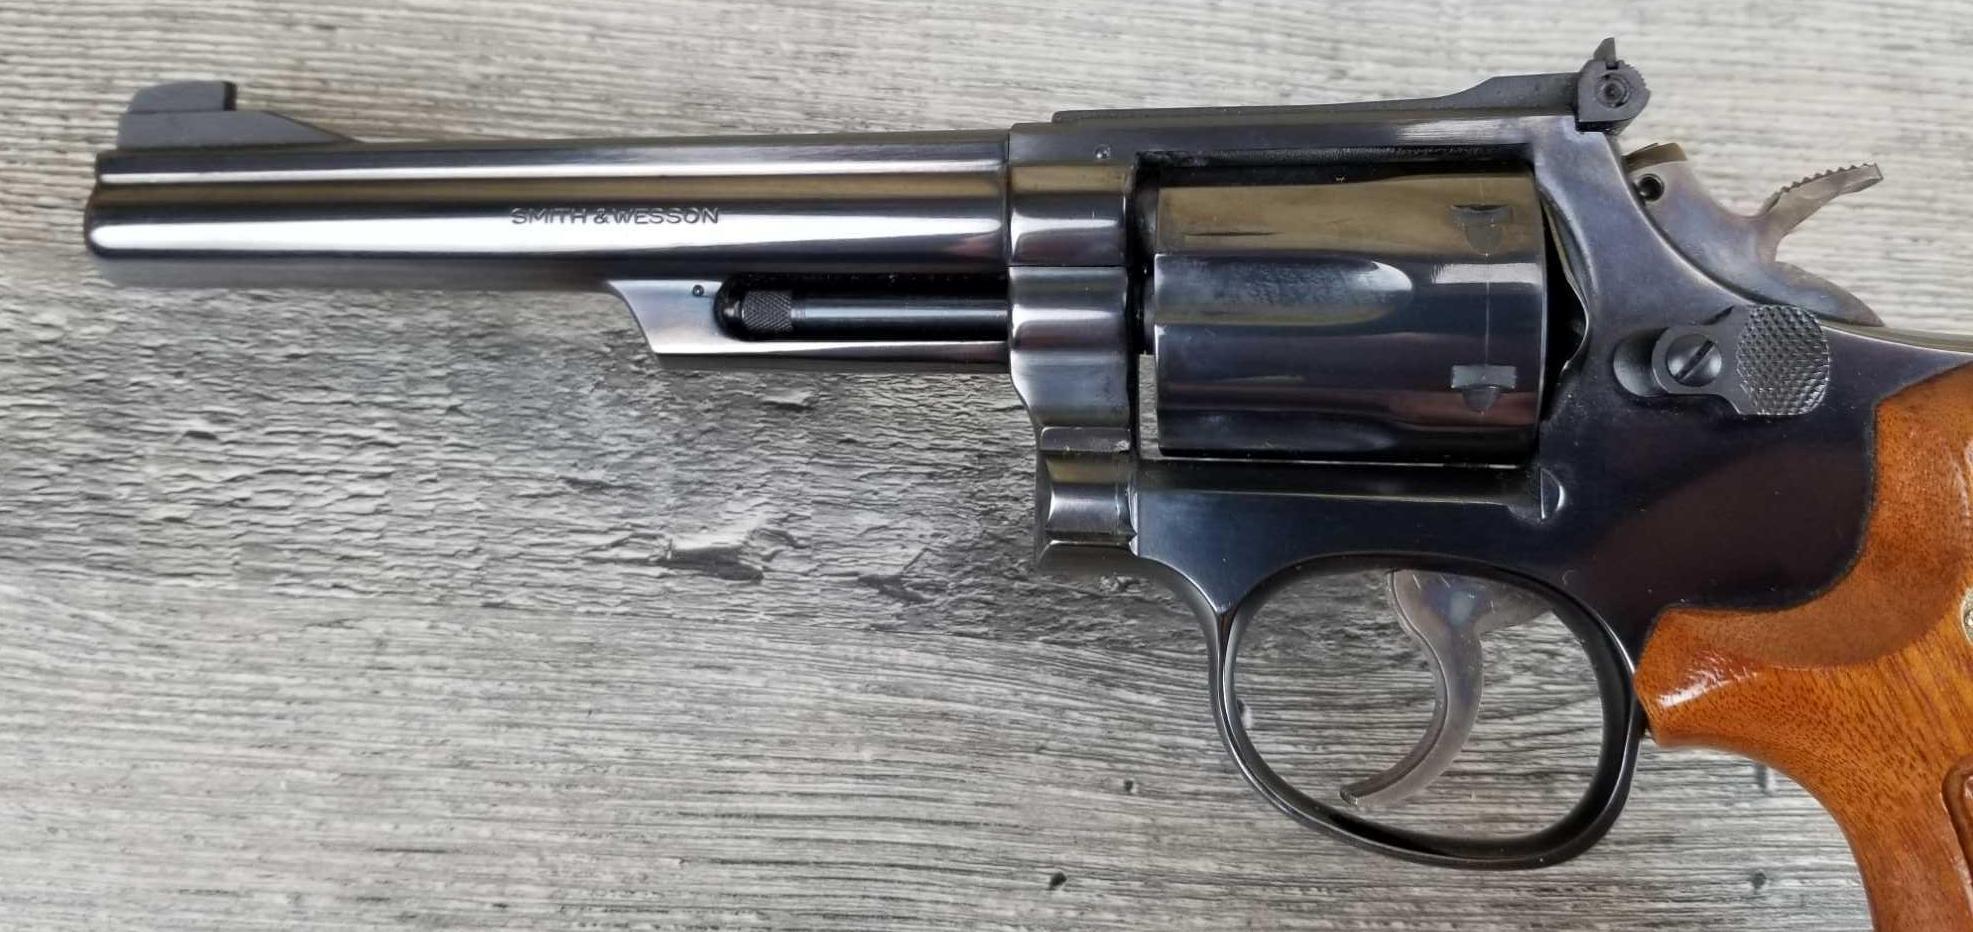 SMITH & WESSON MODEL 19-4